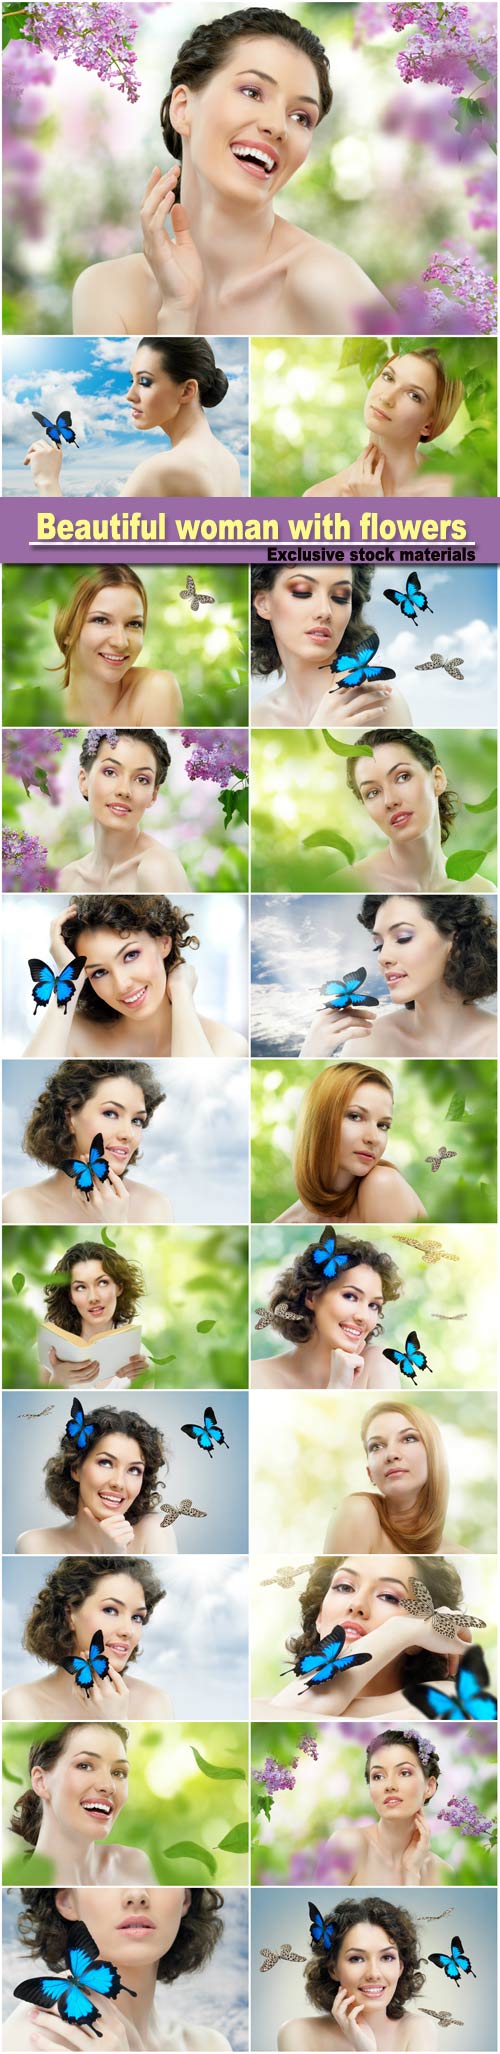 Beautiful woman with flowers and butterflies